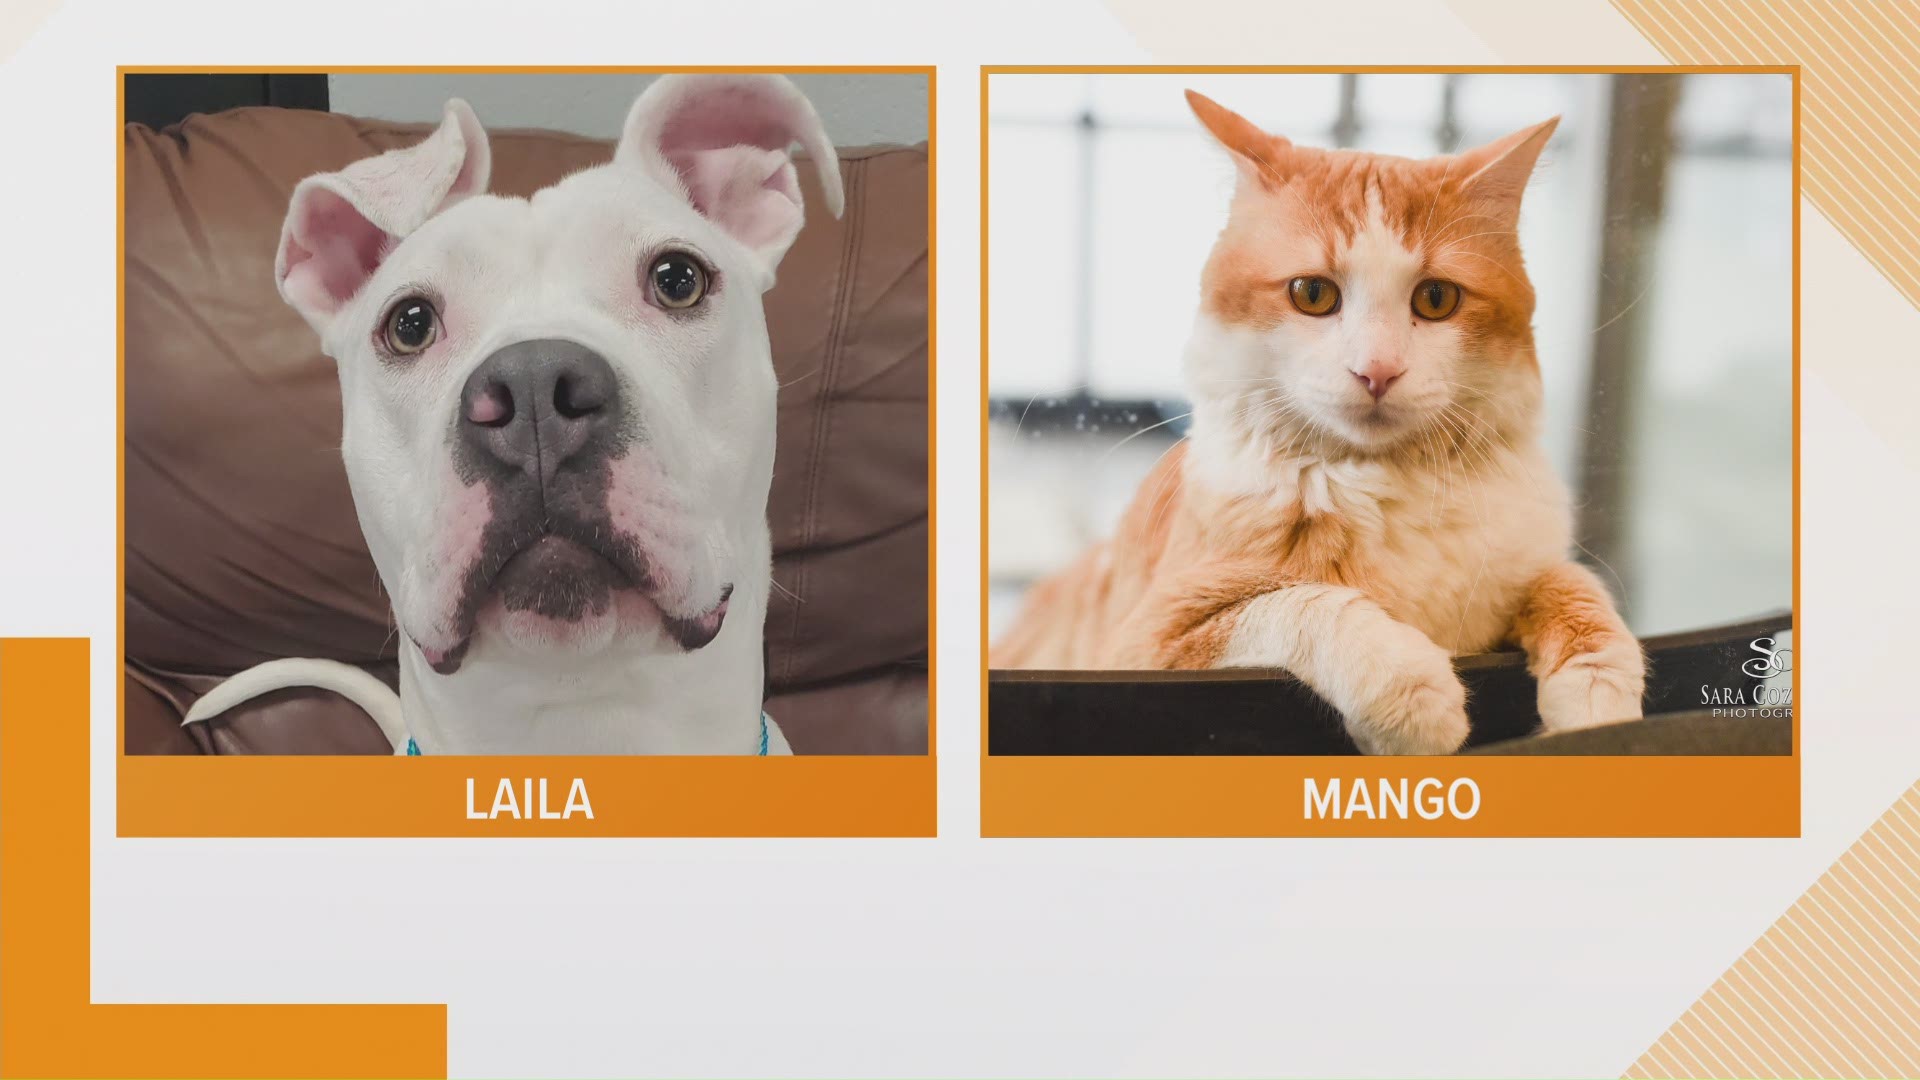 Meet Laila! She may be deaf but that doesn't hold her back! And Mango? He loves his freedom! This playful guy would be a "puur-fect" addition to your office or shop!